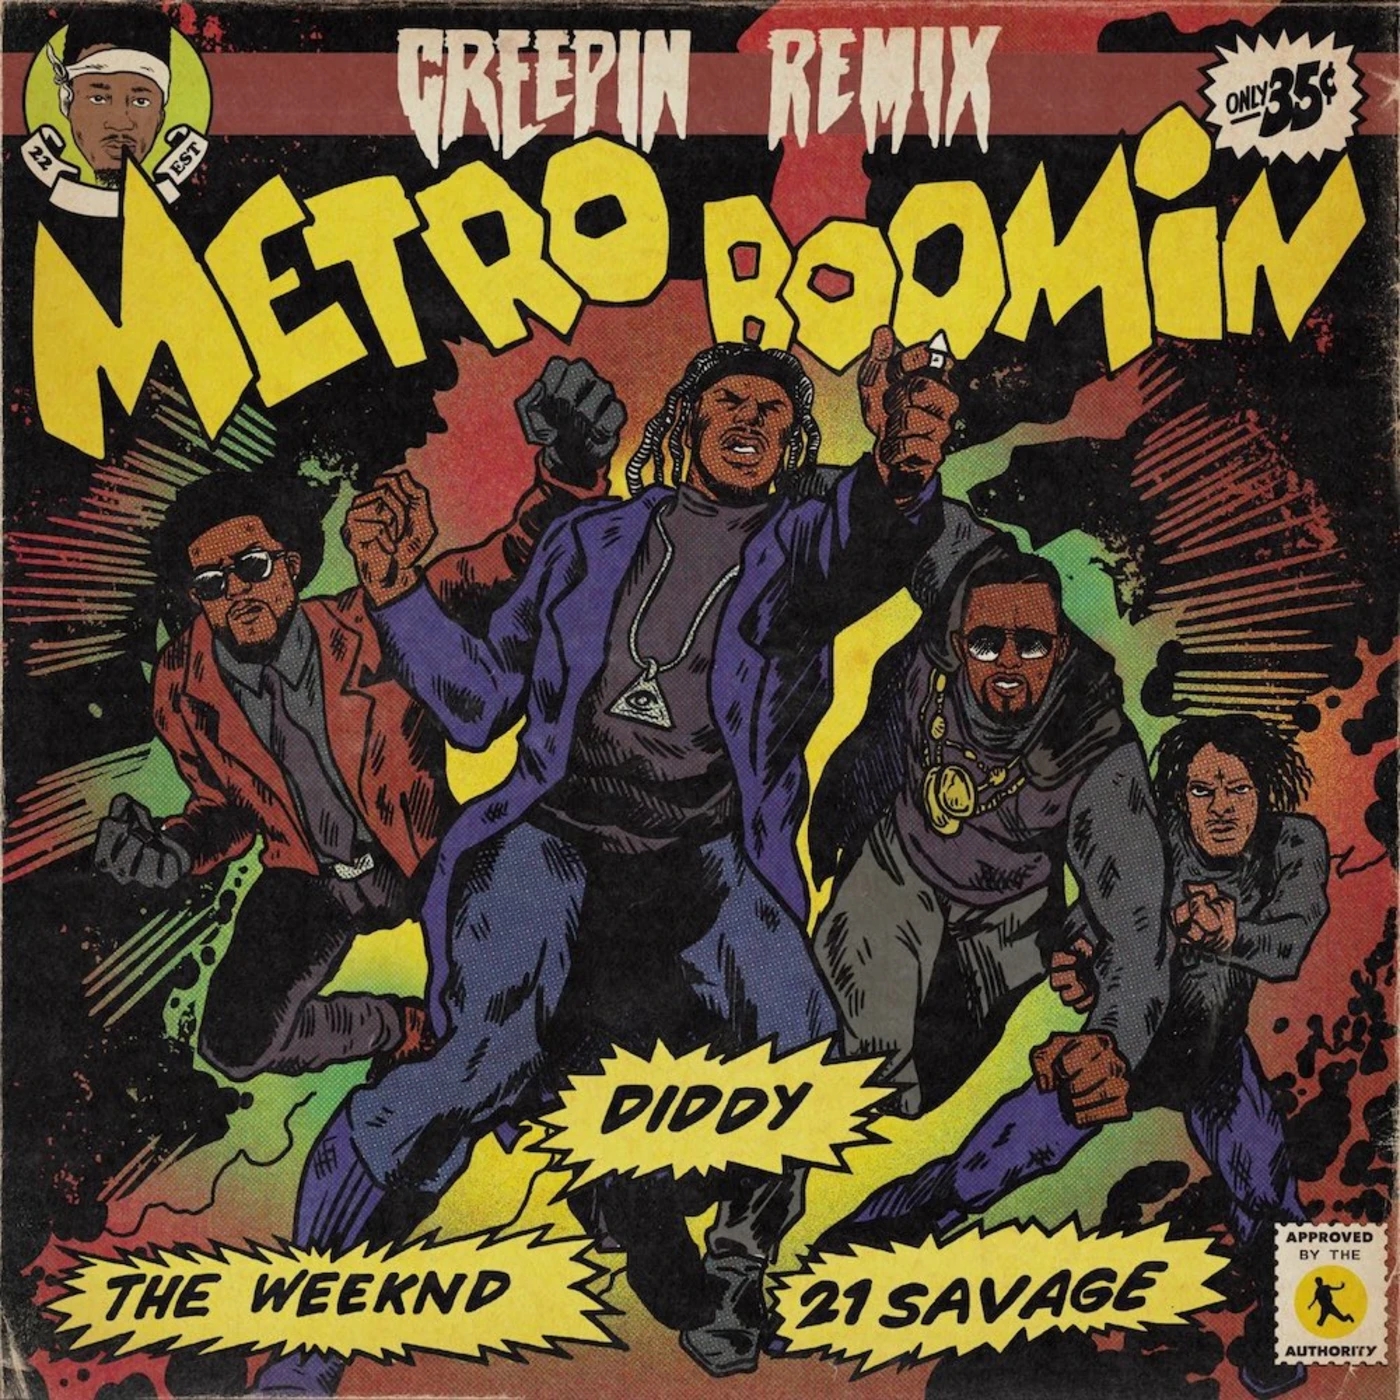 Diddy Hops On Metro Boomin’s “Creepin” Ft. 21 Savage & The Weeknd For The Official Remix